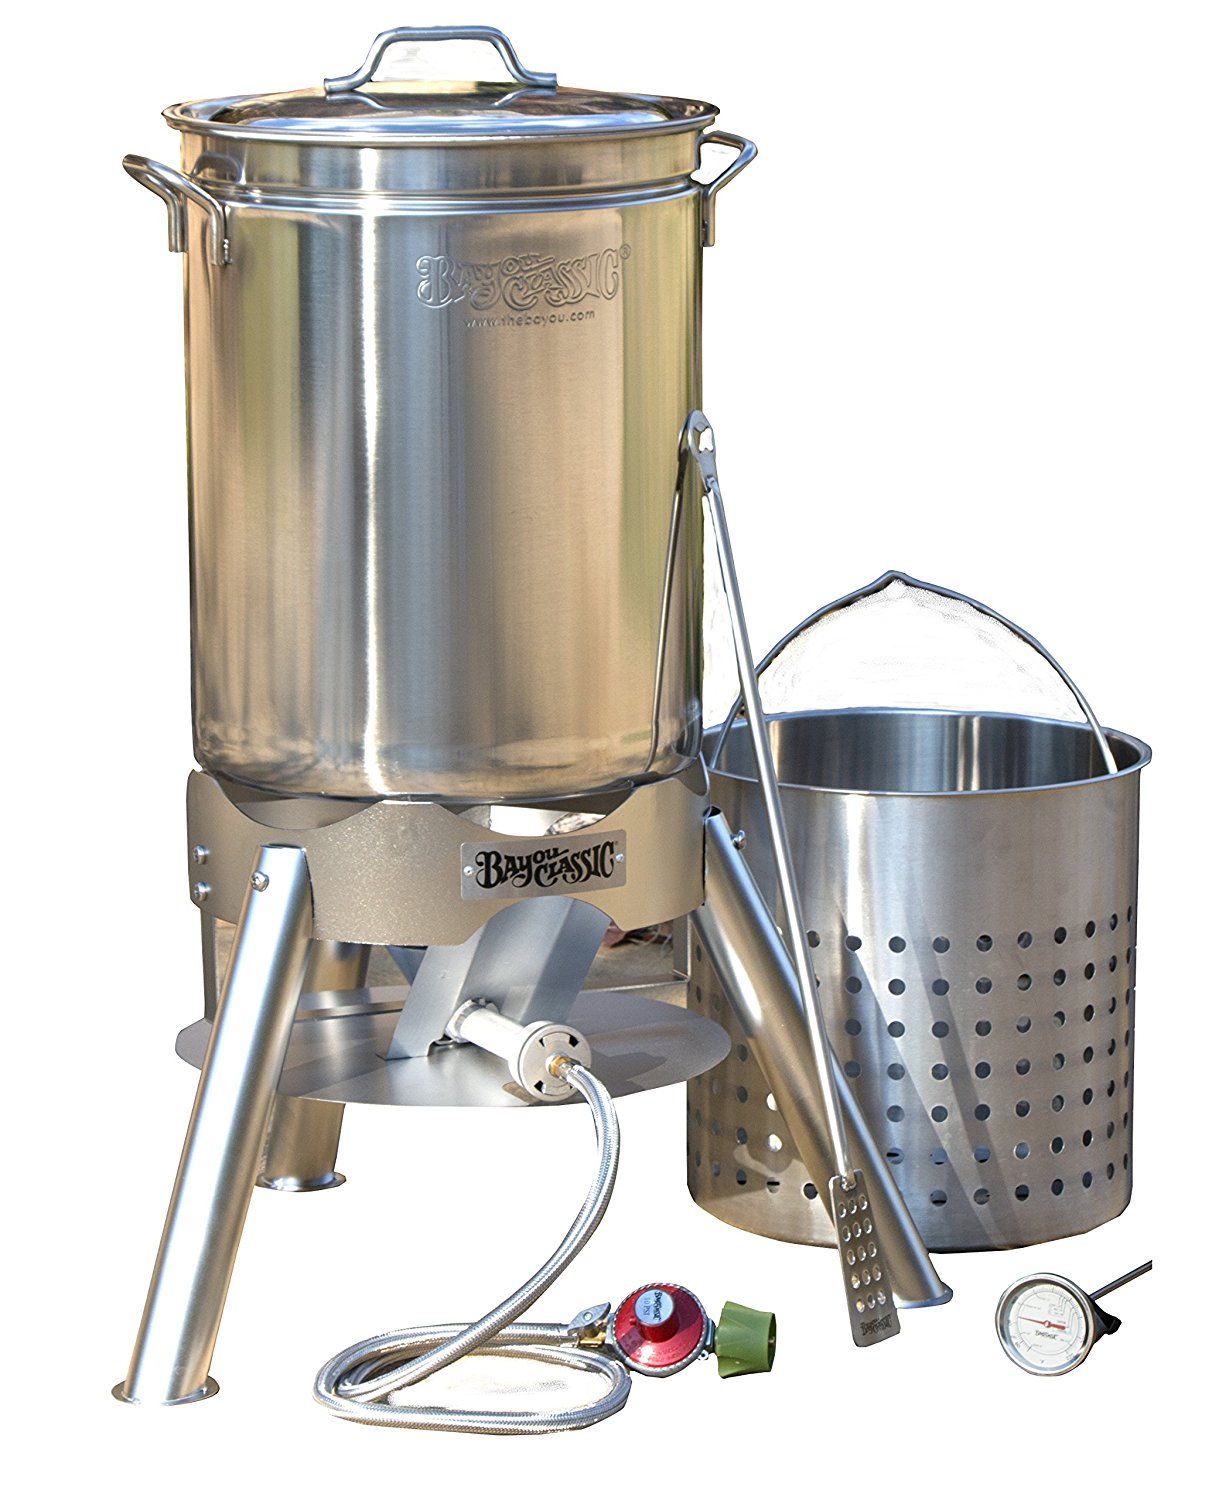 Bayou Classic 800-144 44 quart Boil and Brew, Stainless